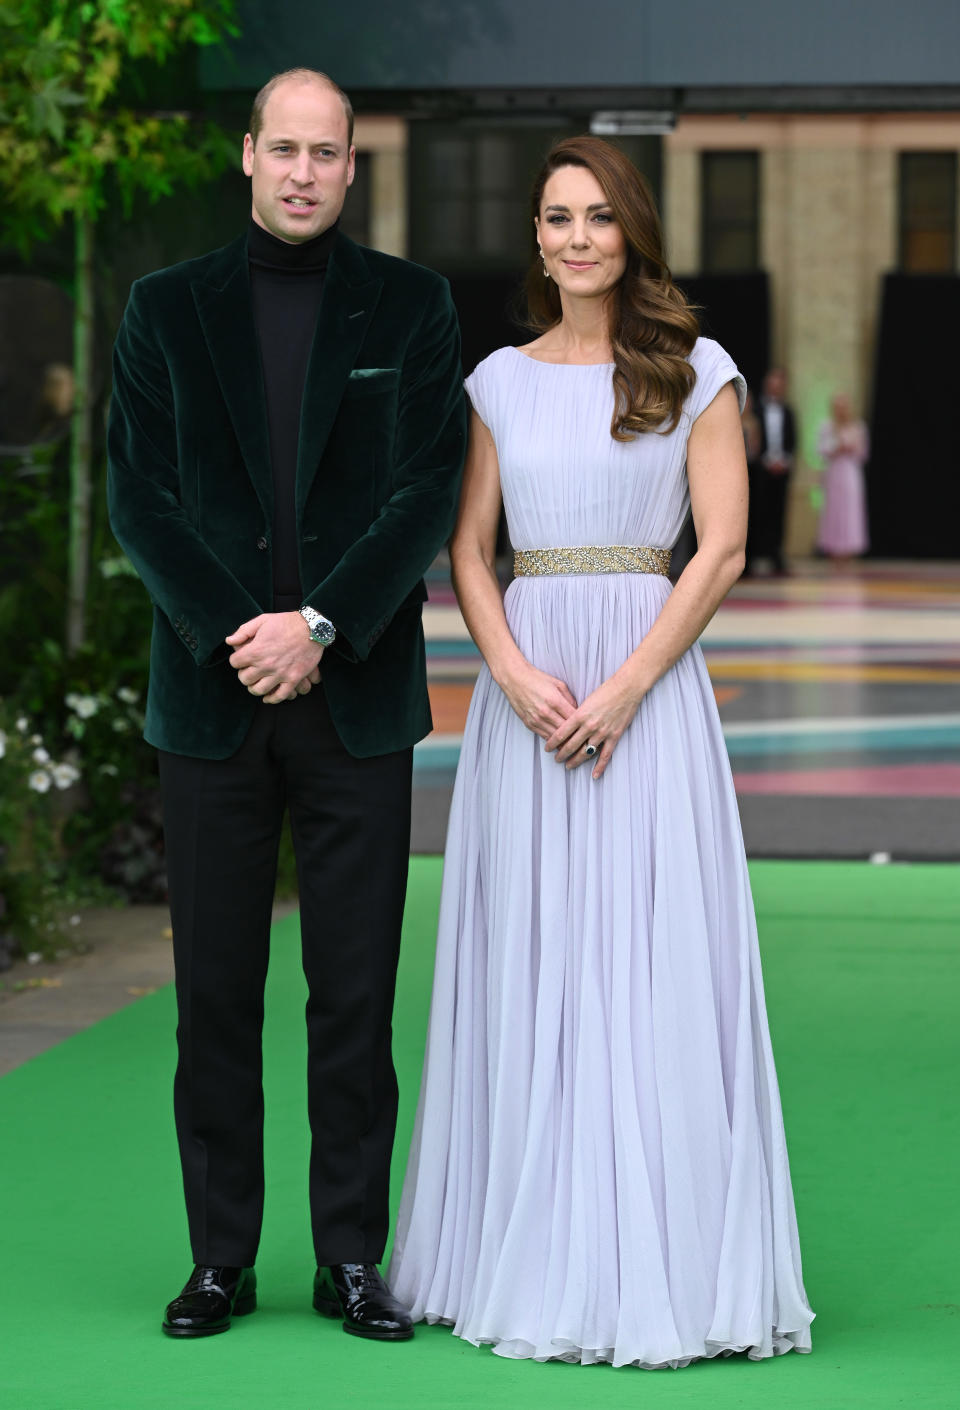 The royal (with wife Kate Middleton in McQueen) drew comparisons to James Bond and Daniel Craig. (Photo: Karwai Tang/WireImage)